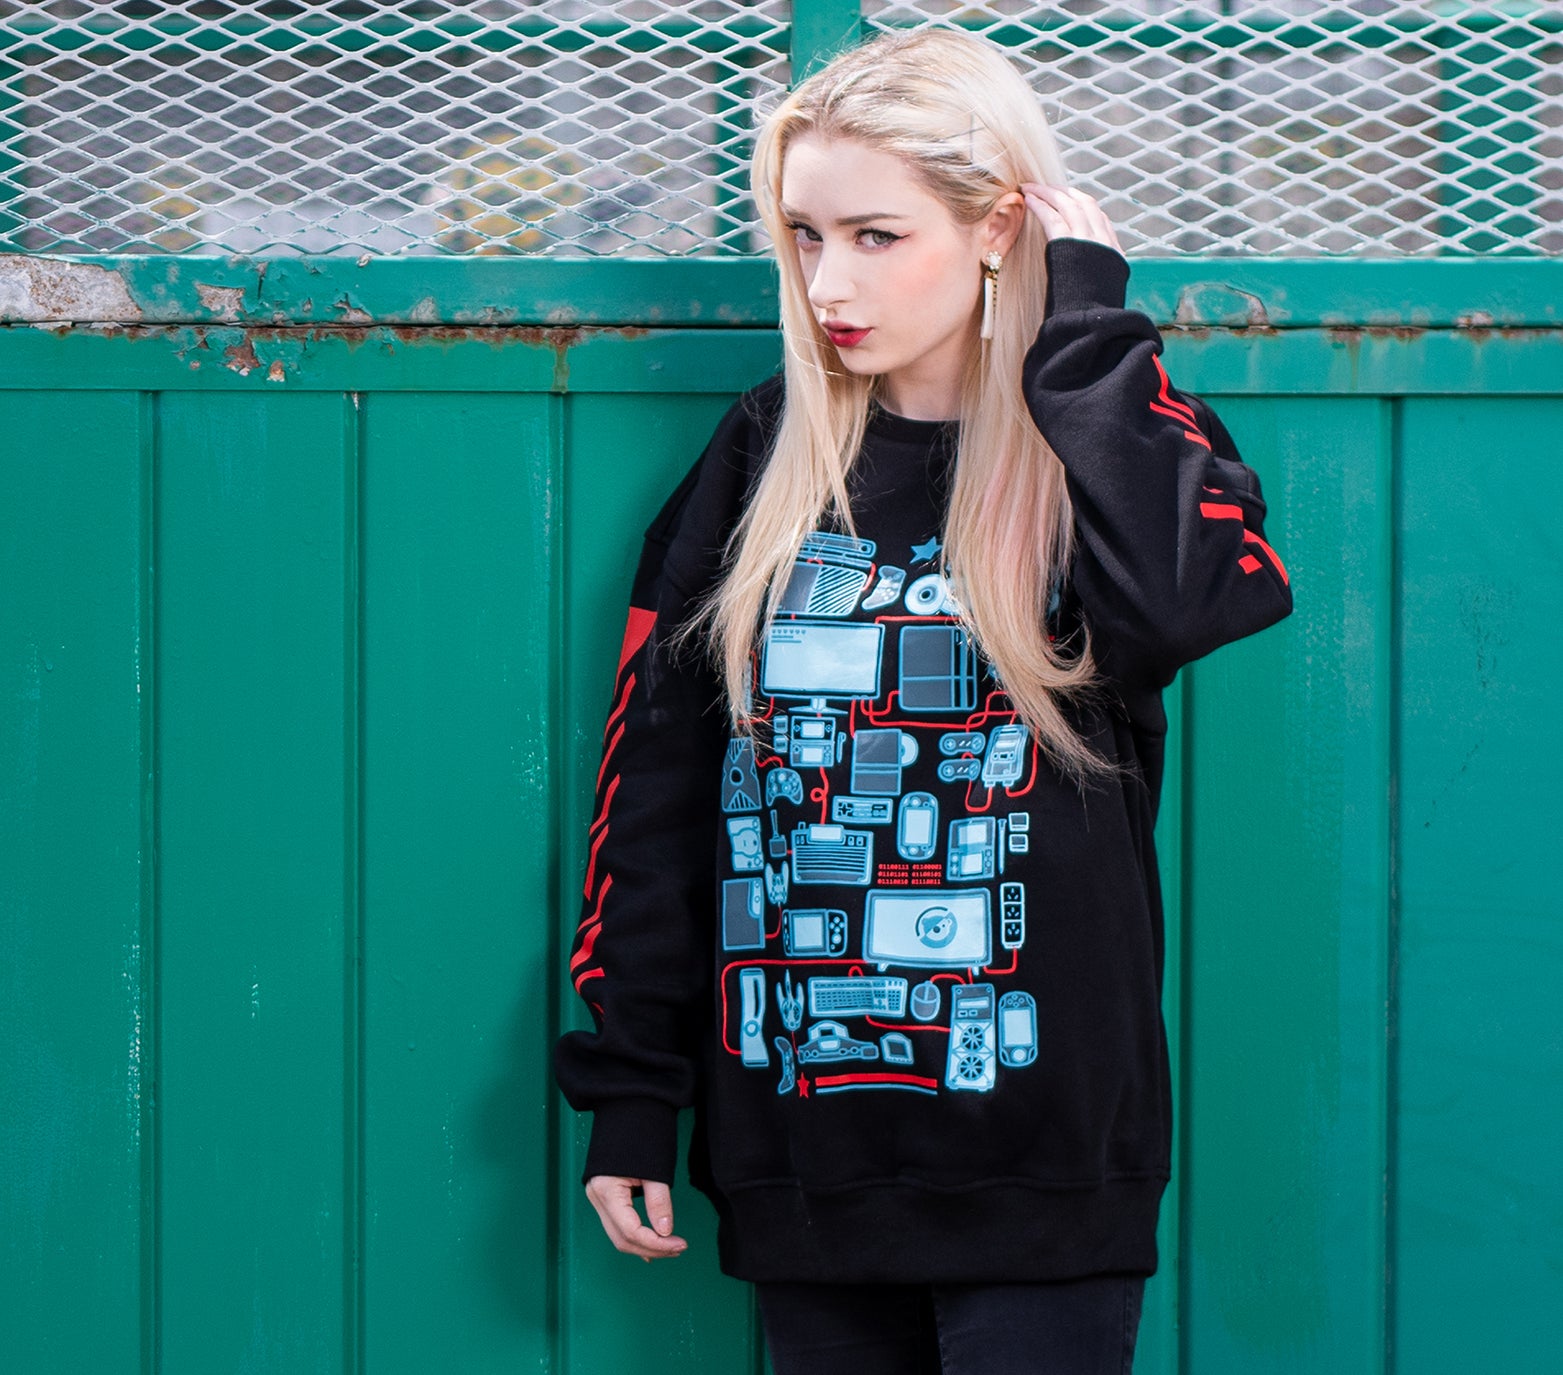 Black sweatshirt with front screen printed design of various console gaming consoles and controllers illustrated in cyan. The front shirt design also features PC gaming as well as mobile gaming devices. The sleeves features slanted red stripes that gives the shirt a streetwear feel. The sweatshirt comes in black with an ultra-soft exterior jersey fabric and a fuzzy soft interior. Sweatshirt comes in XS to 2XL